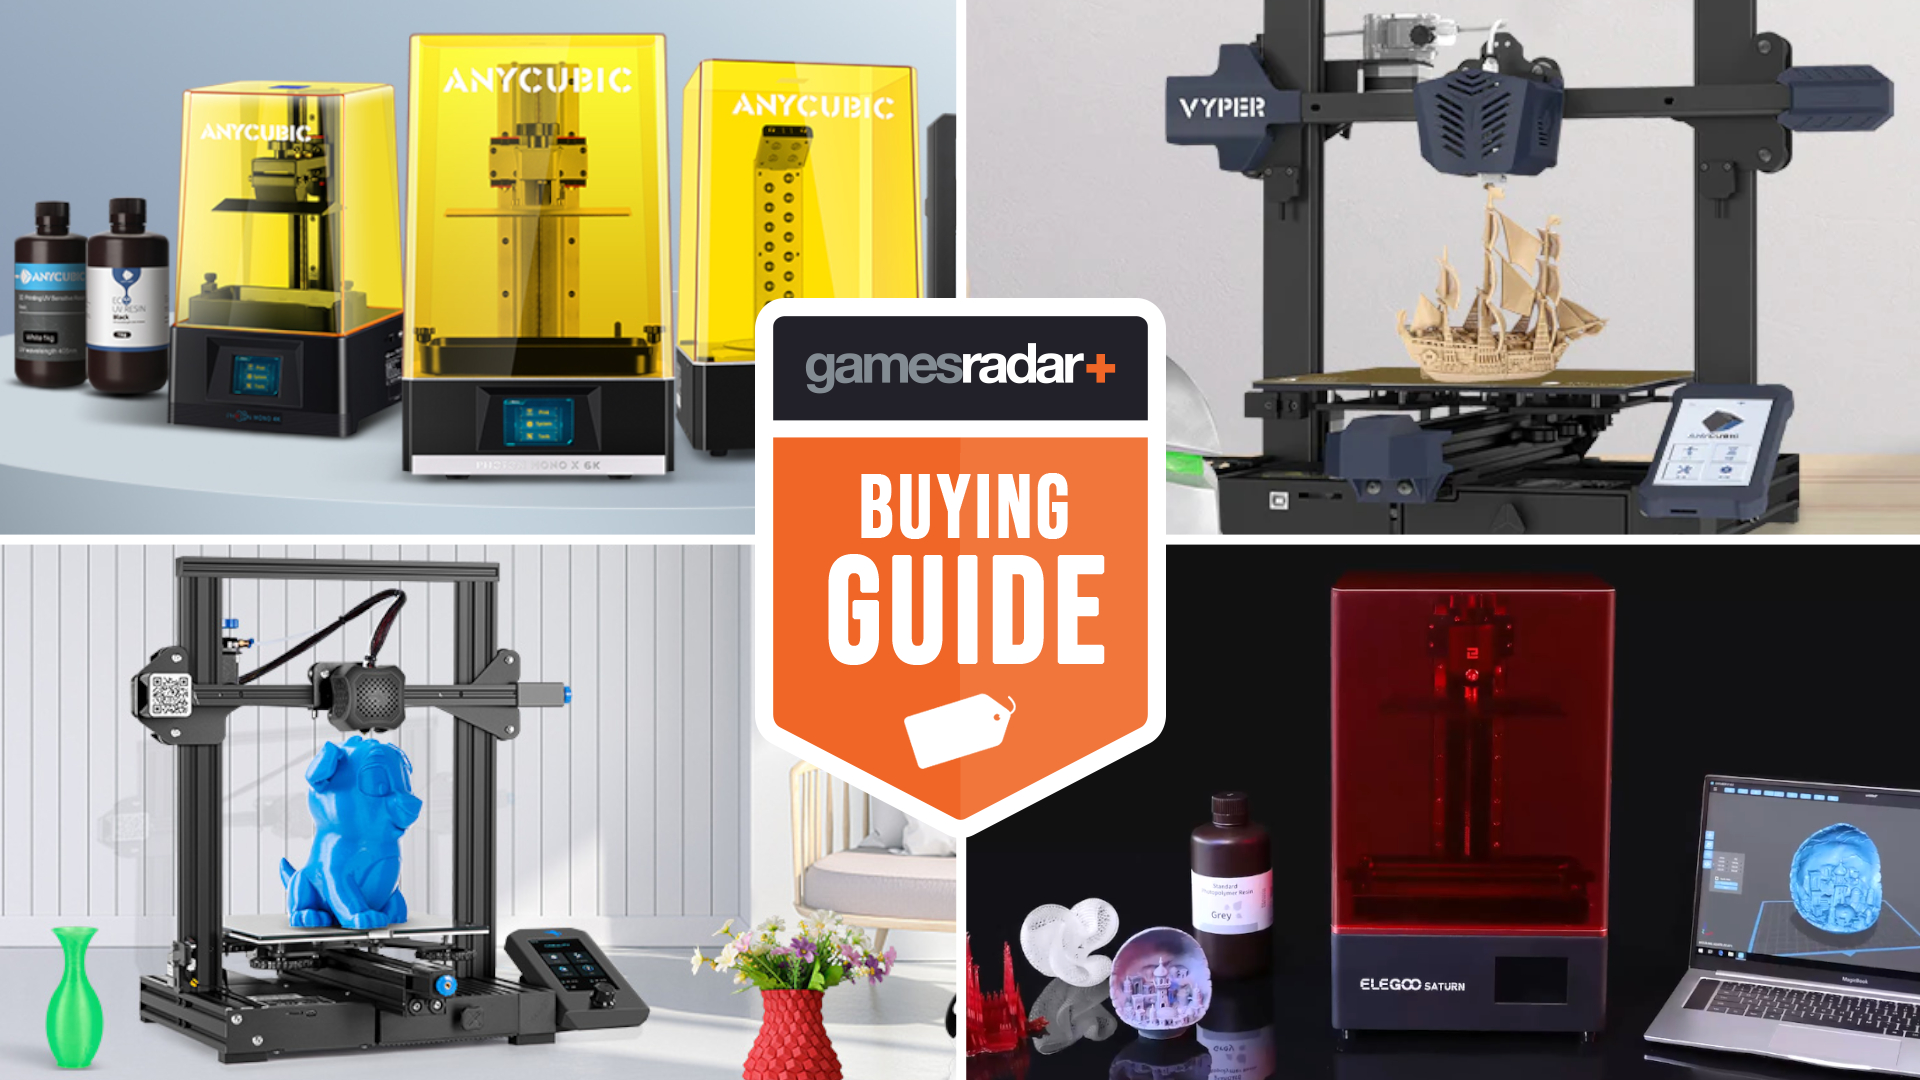 Creality 3D Printer Buying Guides — Creality Experts